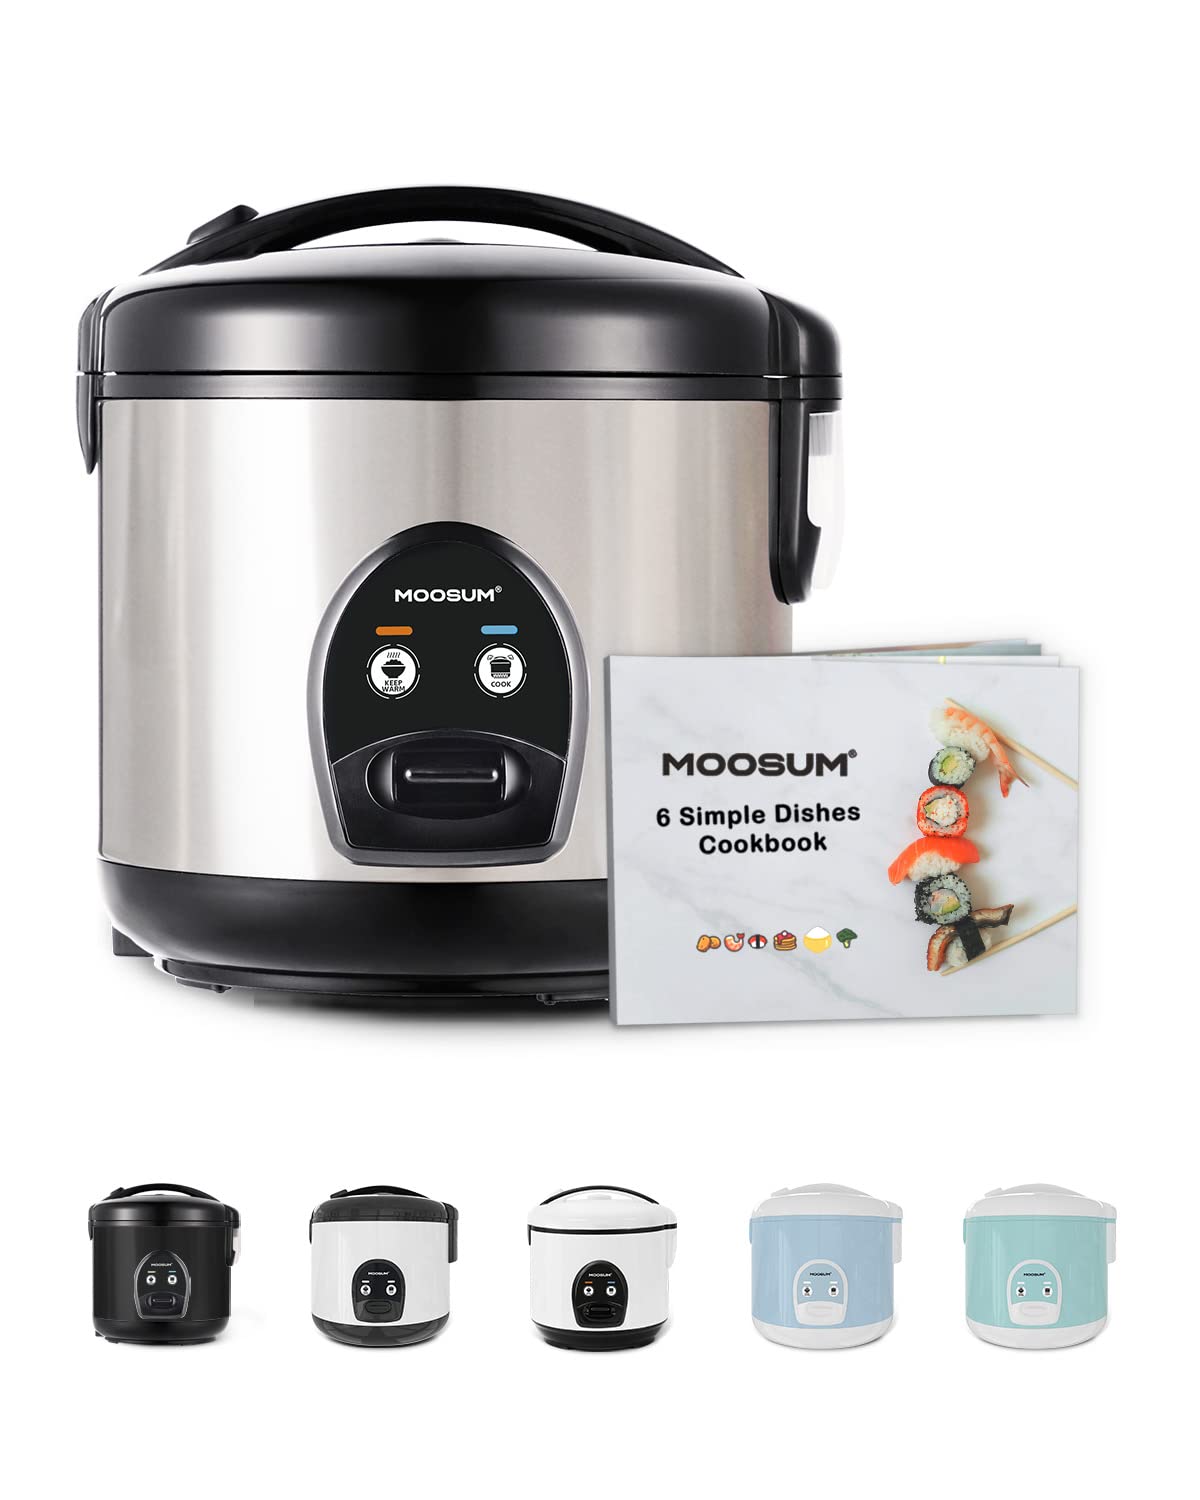 MOOSUM Electric Rice Cooker with One Touch for Asian Japanese Sushi Rice, 5-cup Uncooked/10-cup Cooked, Fast&Convenient Cooker with Ceramic Nonstick inner pot, Stainless Steel Housing and Auto Warmer